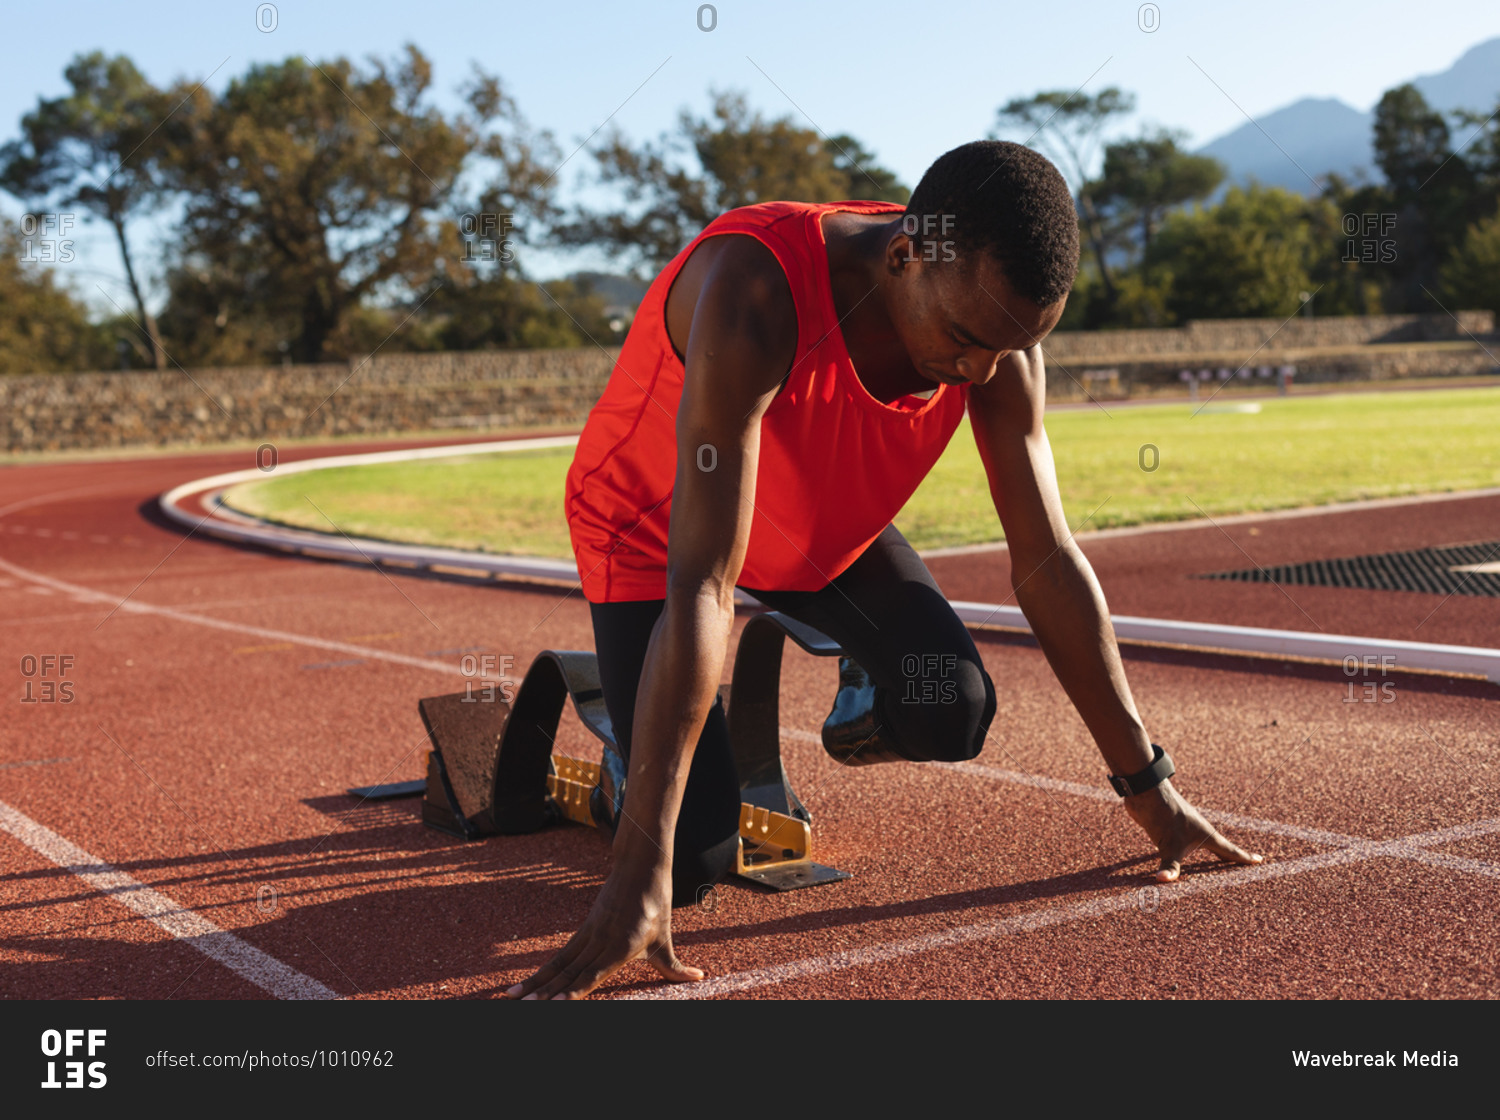 Fit, mixed race disabled male athlete at an outdoor sports stadium, kneeling in  starting blocks on race track wearing running blades. Disability athletics sport training.